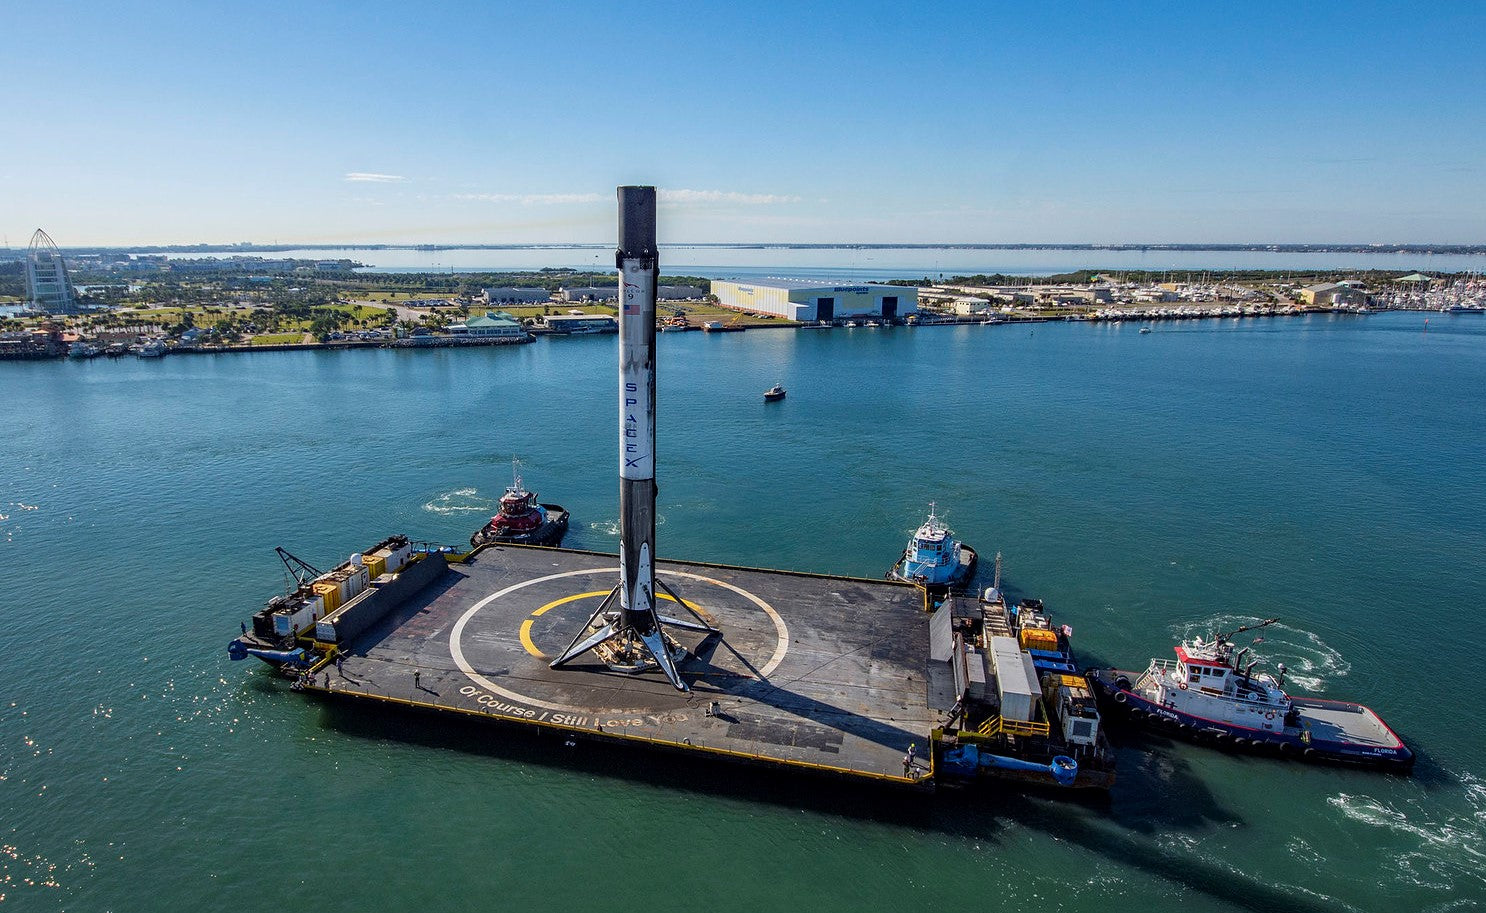 SpaceX submits FCC request to test Starlink internet on Falcon 9 landing droneships